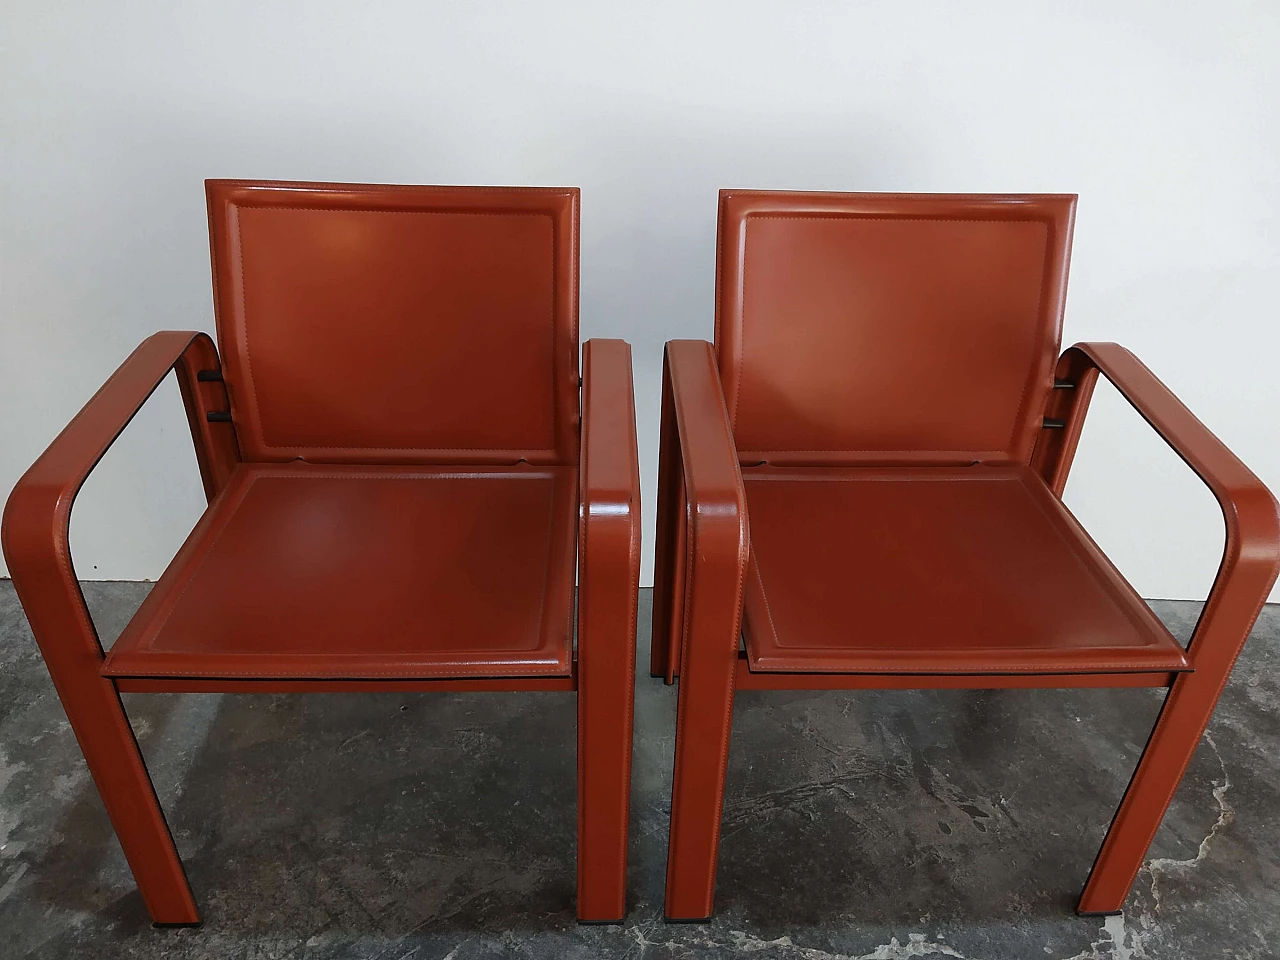 Pair of Golfo dei Poeti chairs by Toussaint & Angeloni manufactured by Matteo Grassi, 1980s 8